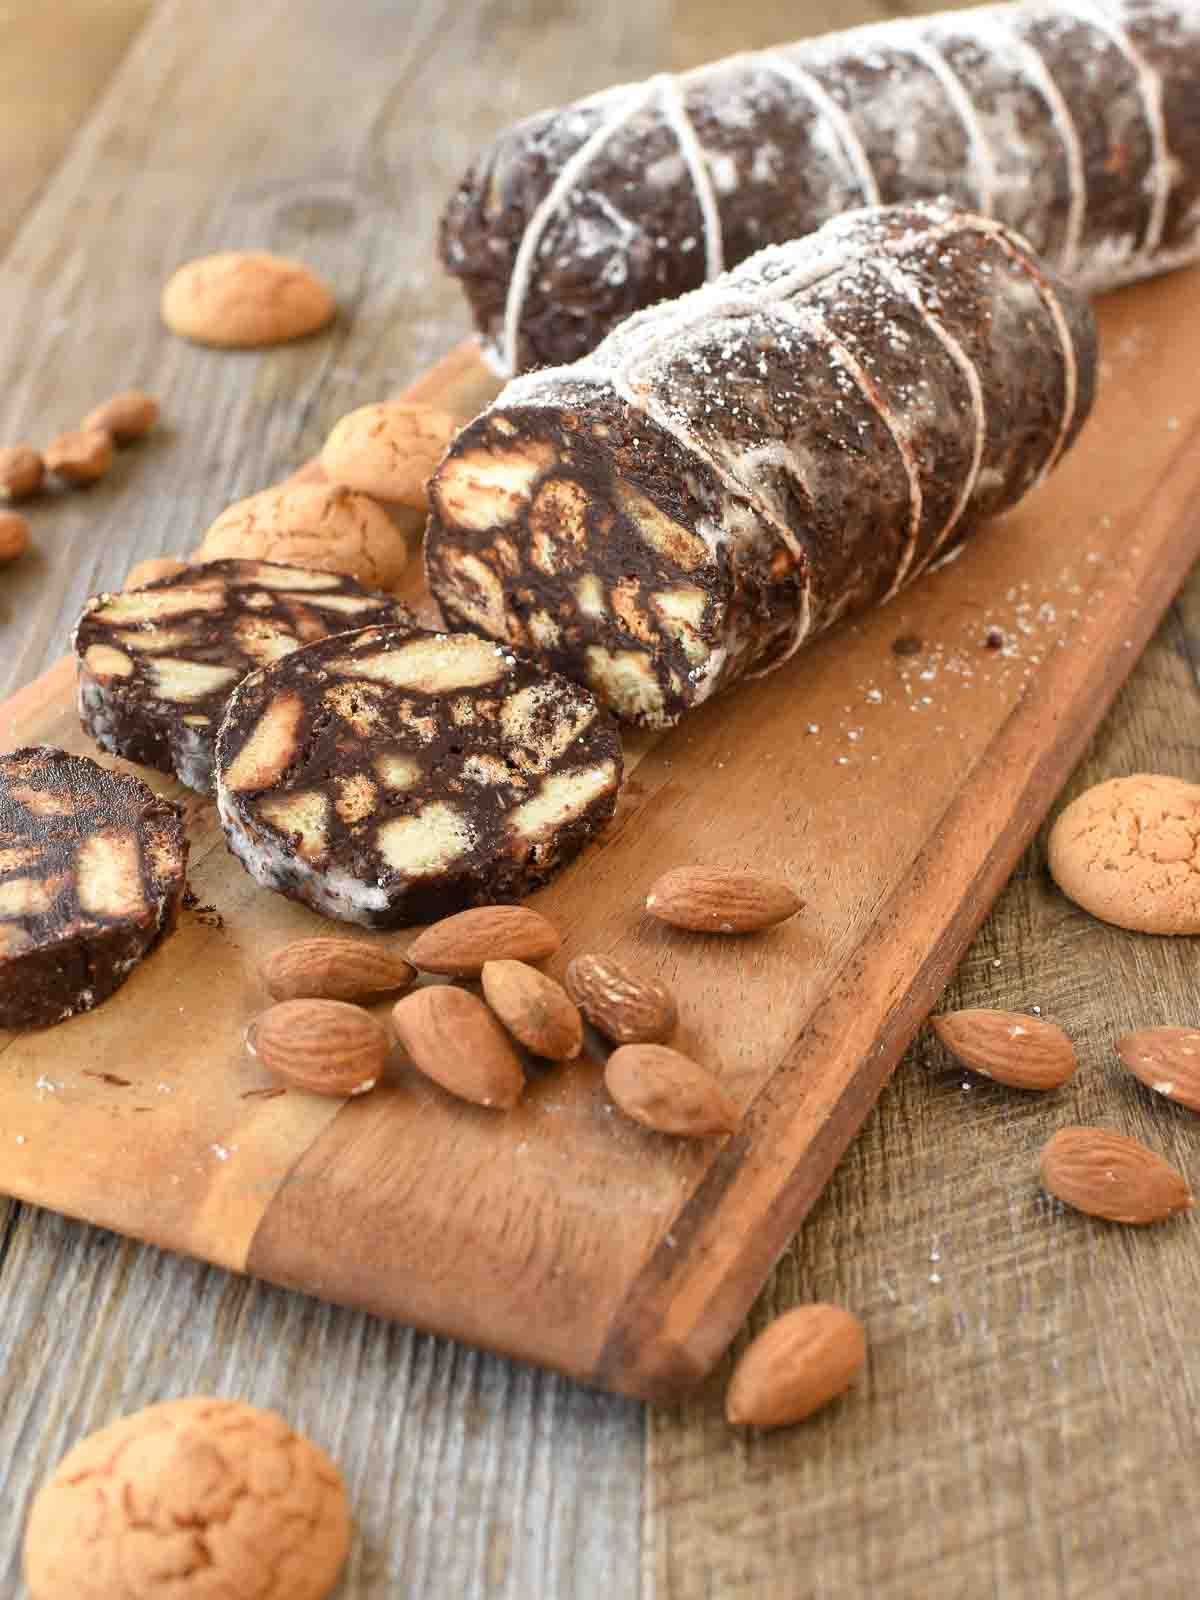 Chocolate salami on wooden board with three slices cut.